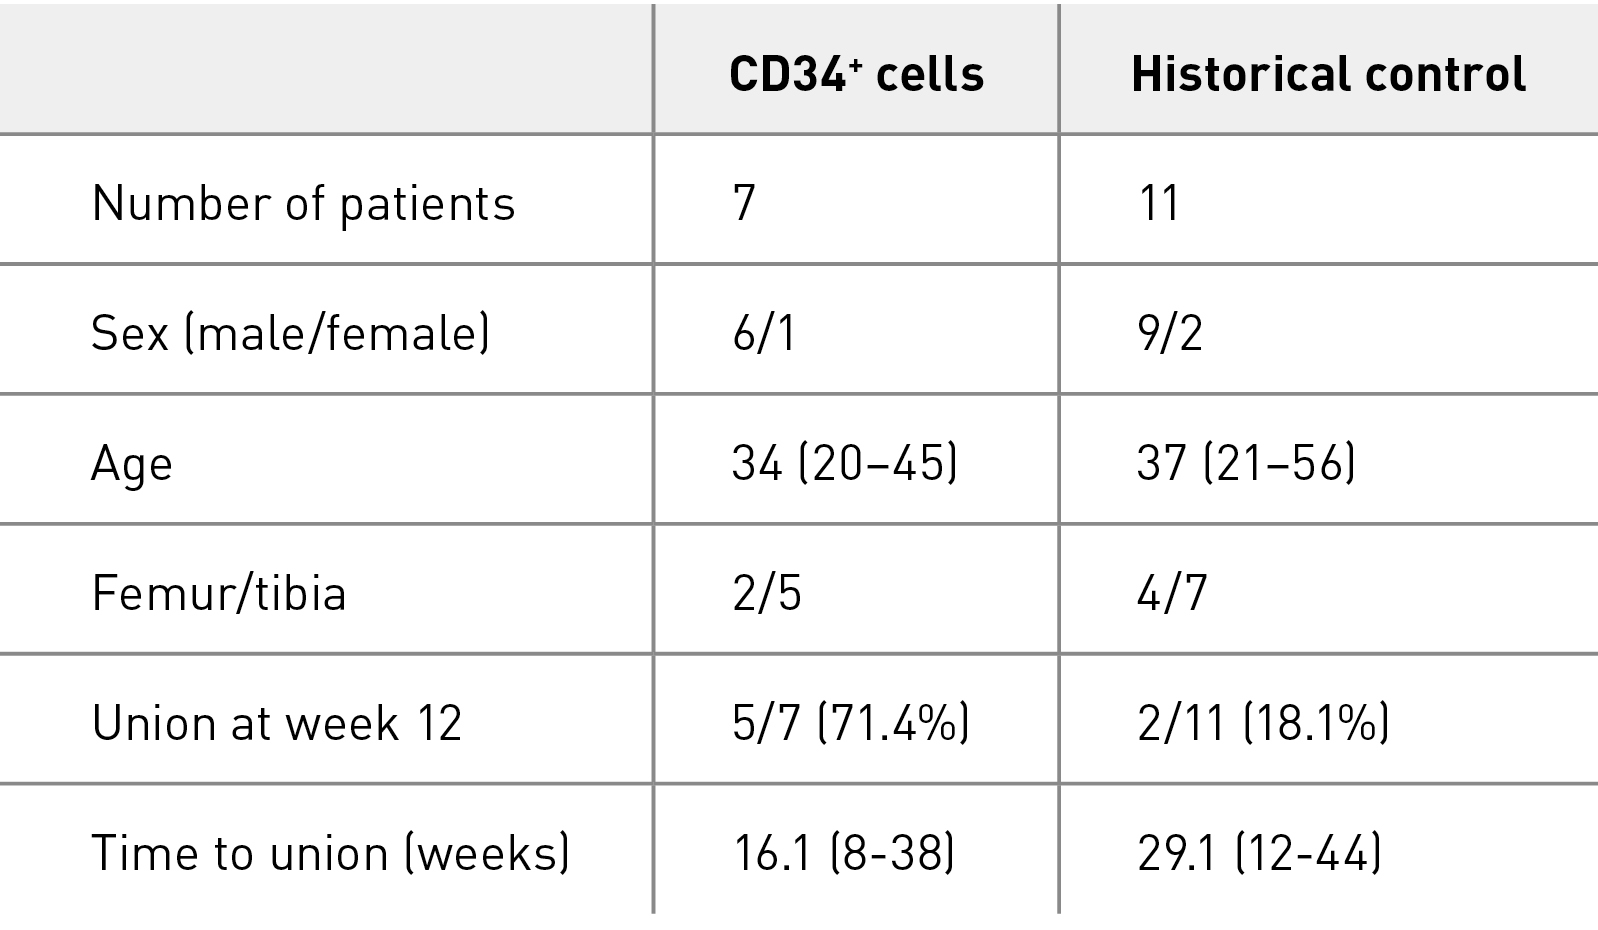 Table 3. Comparison of phase I/II study with historical control